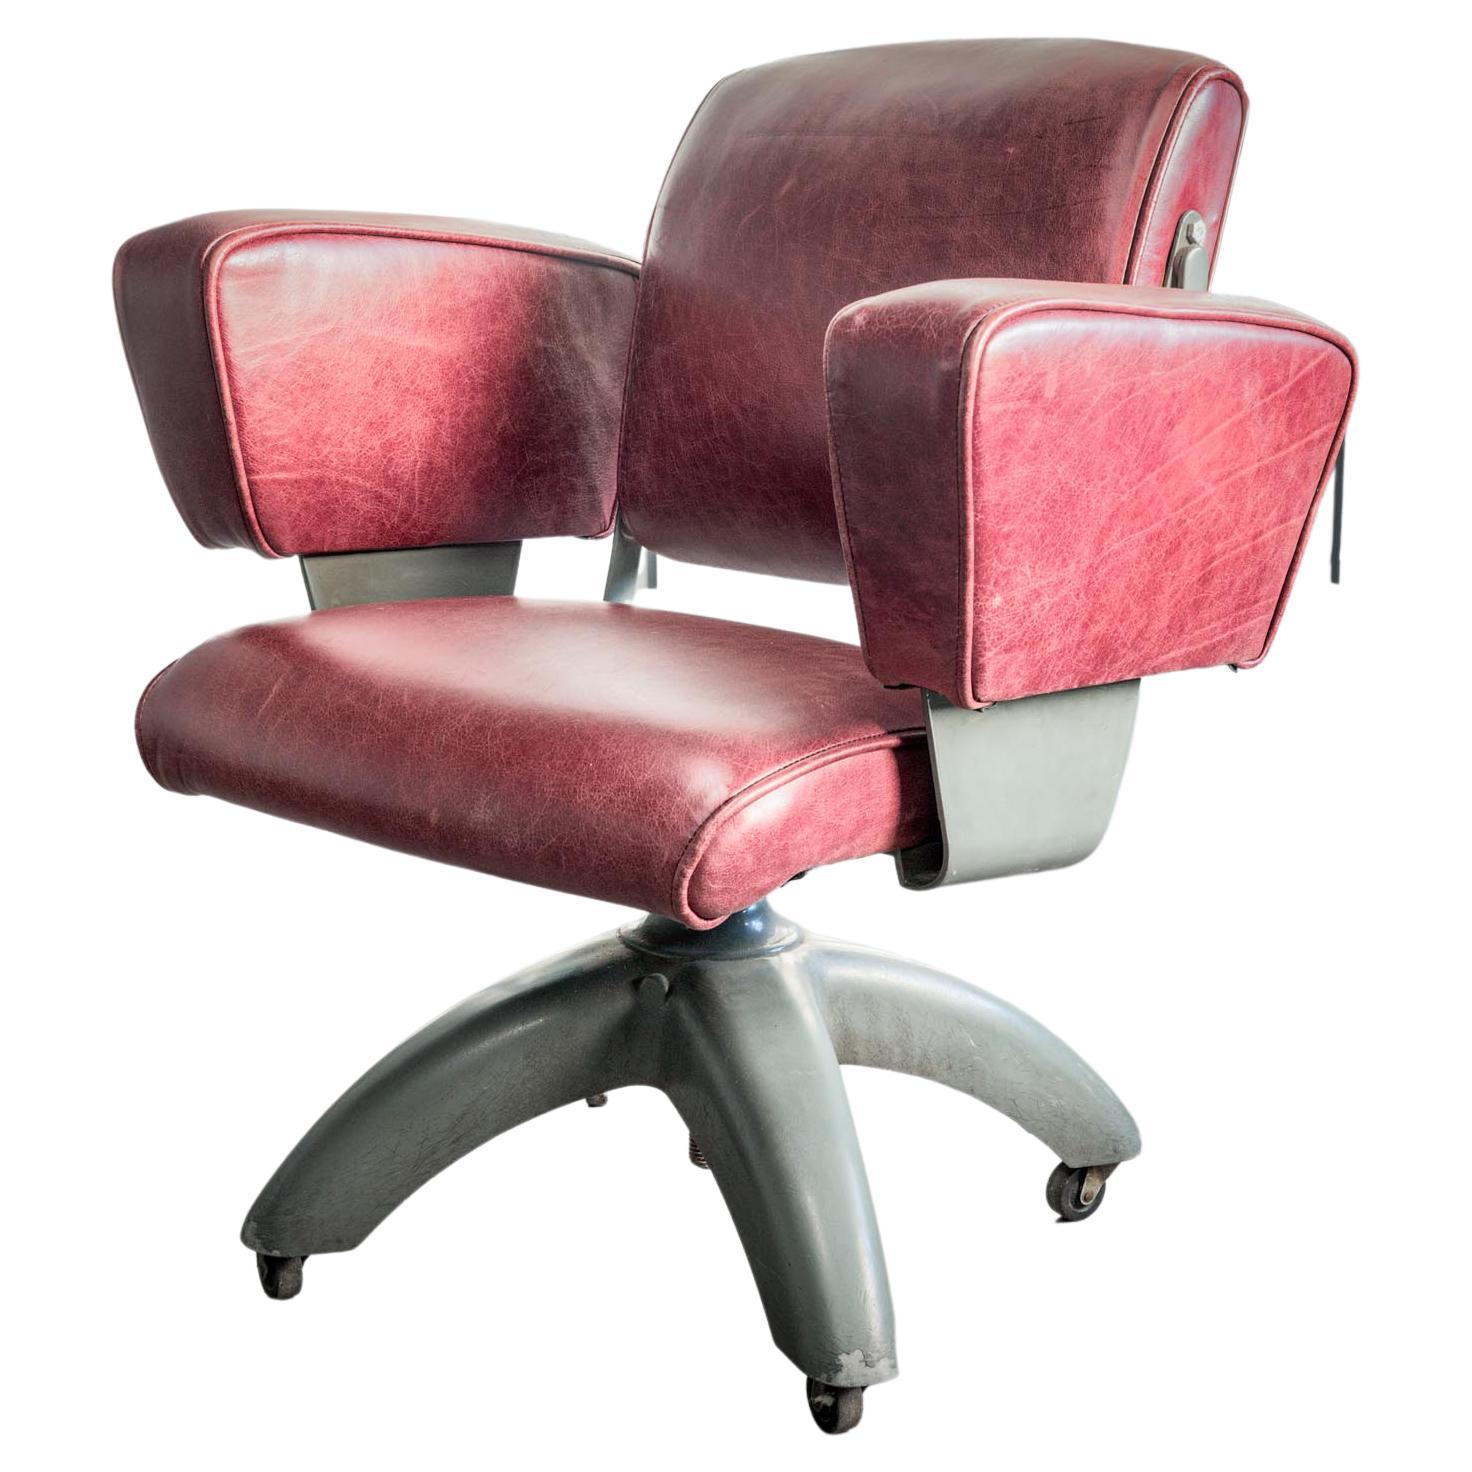 Tansad De Luxe v.26 Red Leather Office Chair For Sale